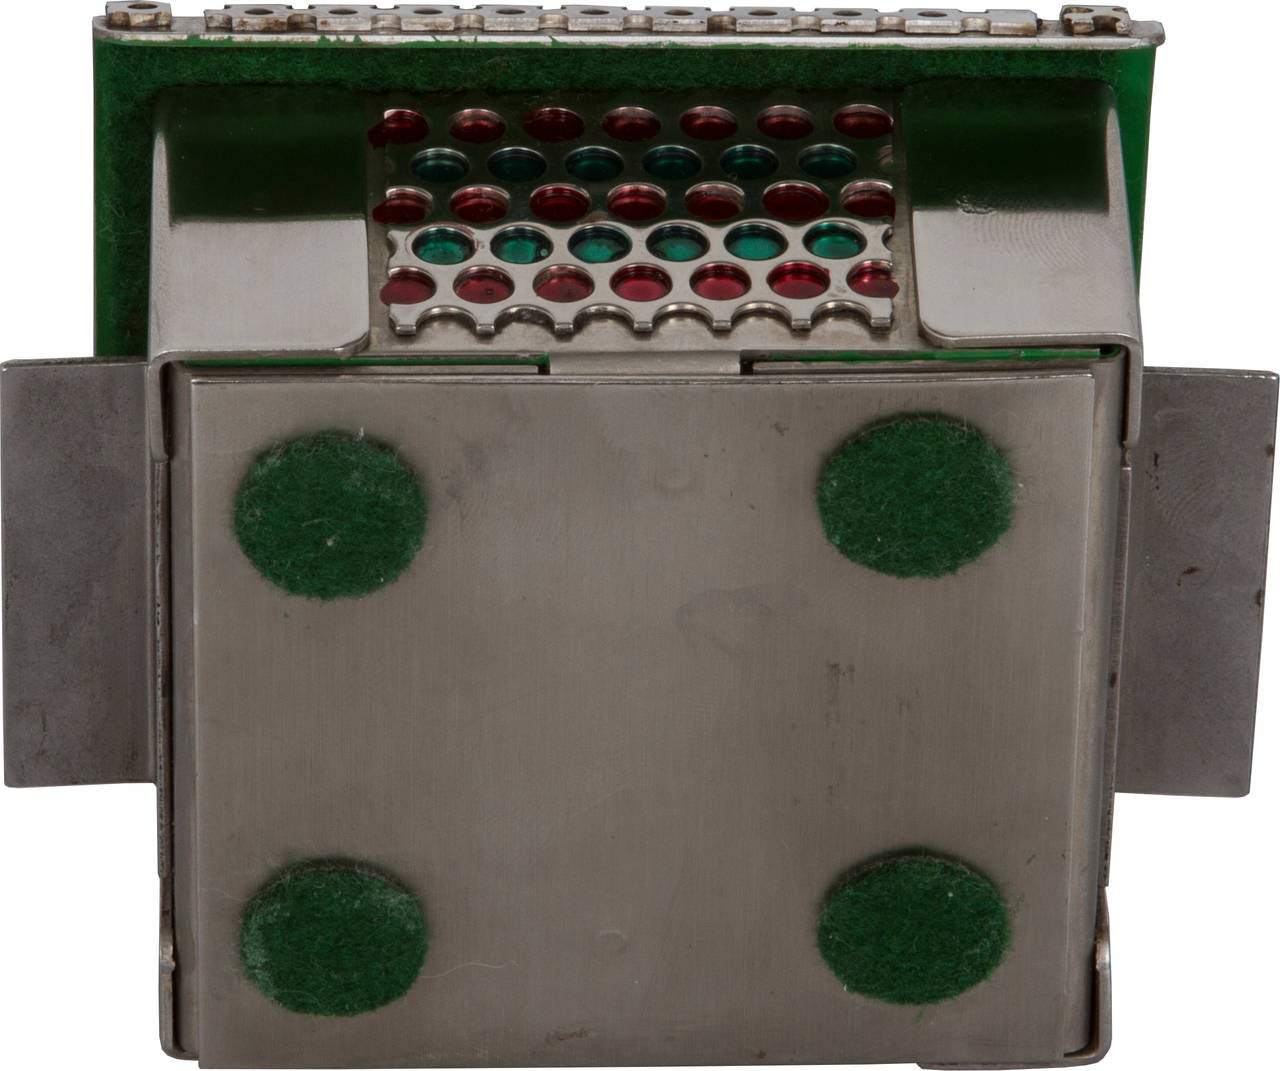 Szwarc collects metal remnants and works them into his imaginative and carefully crafted designs. This box features green and red enamel incorporated in the design.